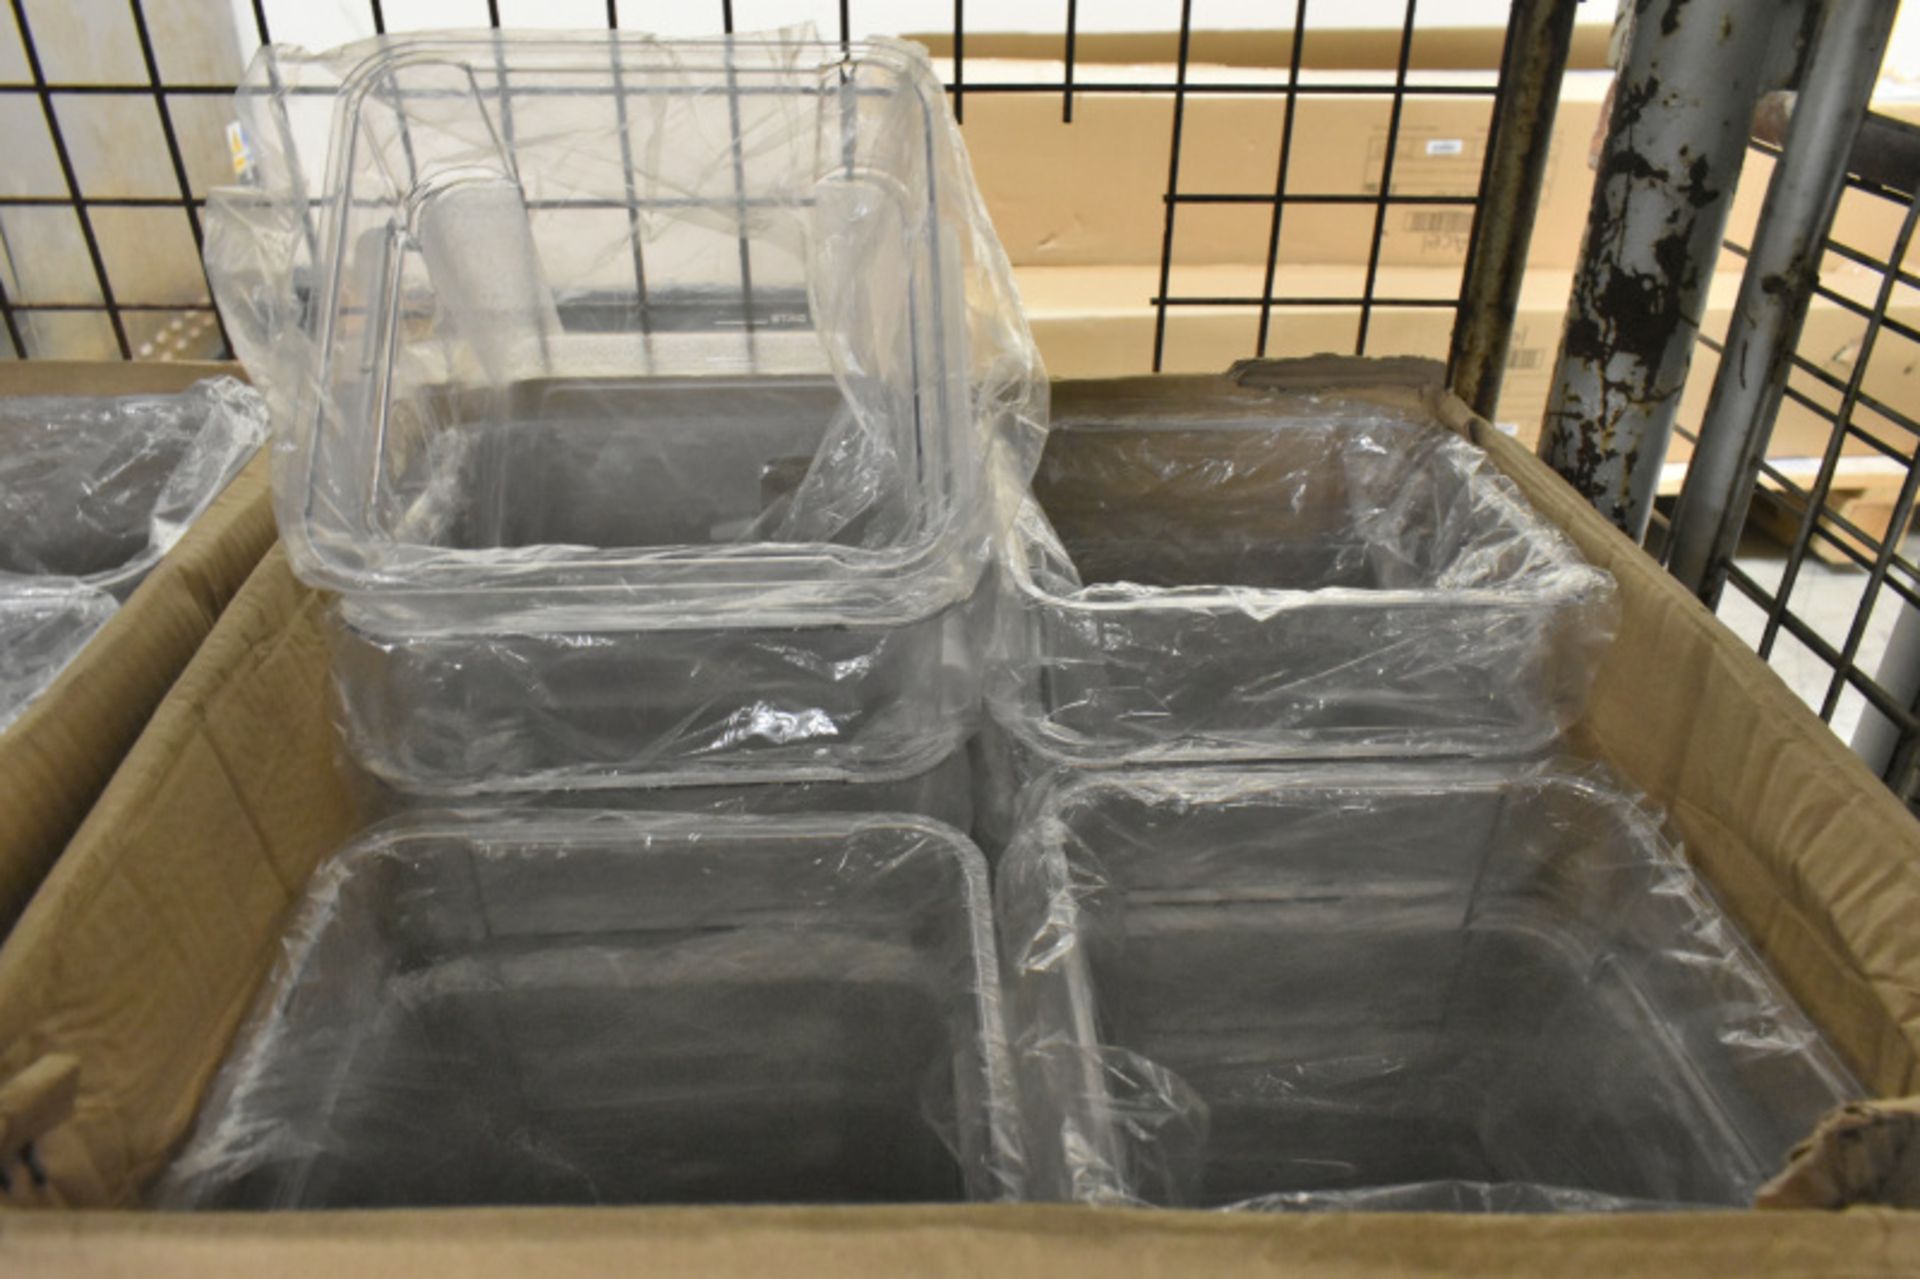 Various Catering Equipment - 72x Transworld Clear Plastic Containers, 23x White Plastic Tubs - Image 7 of 8